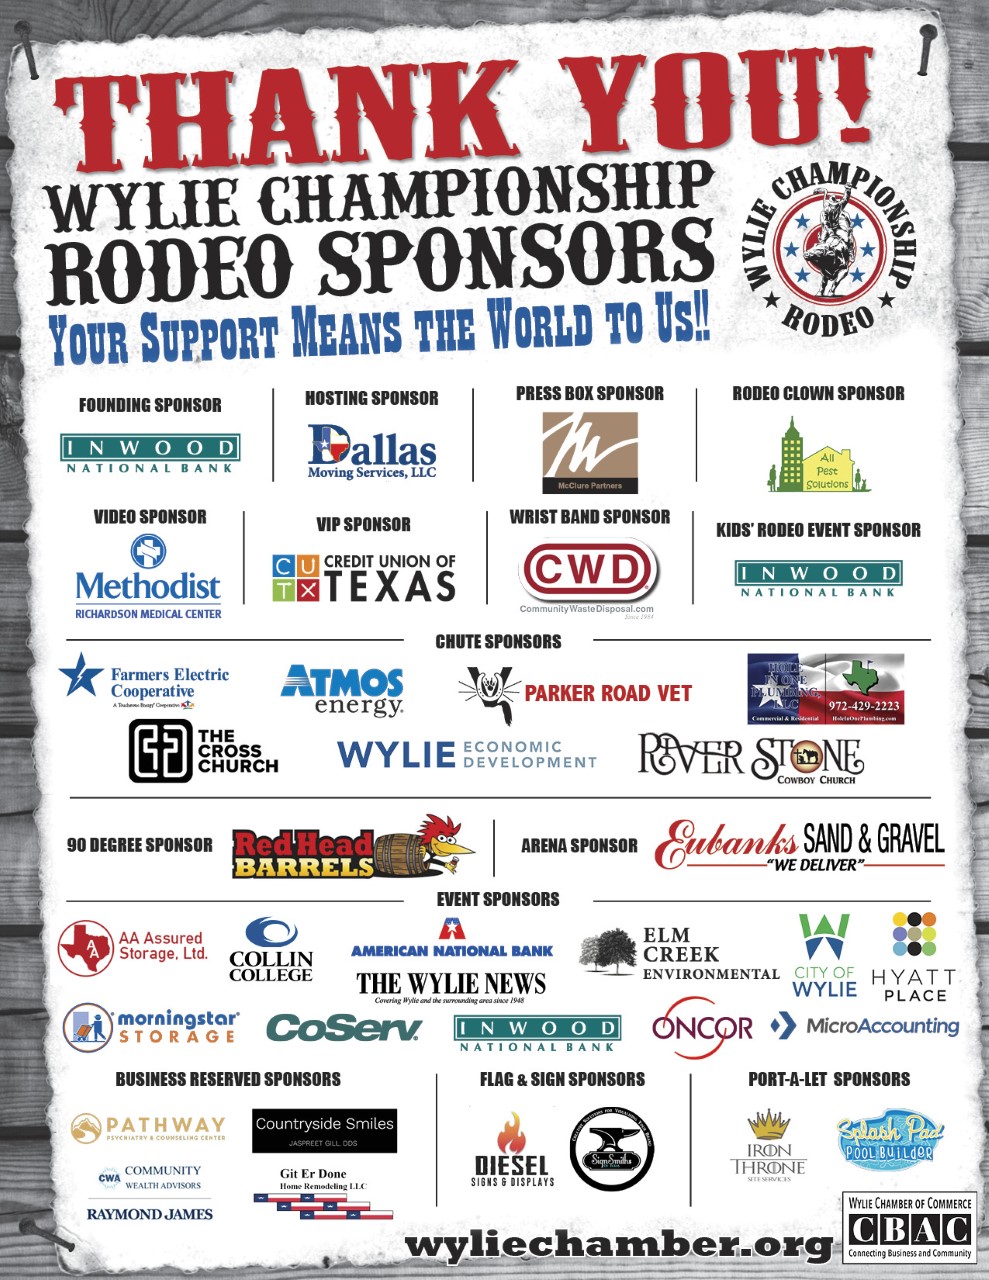 Wylie Championship Rodeo 2022 | Wylie Chamber of Commerce